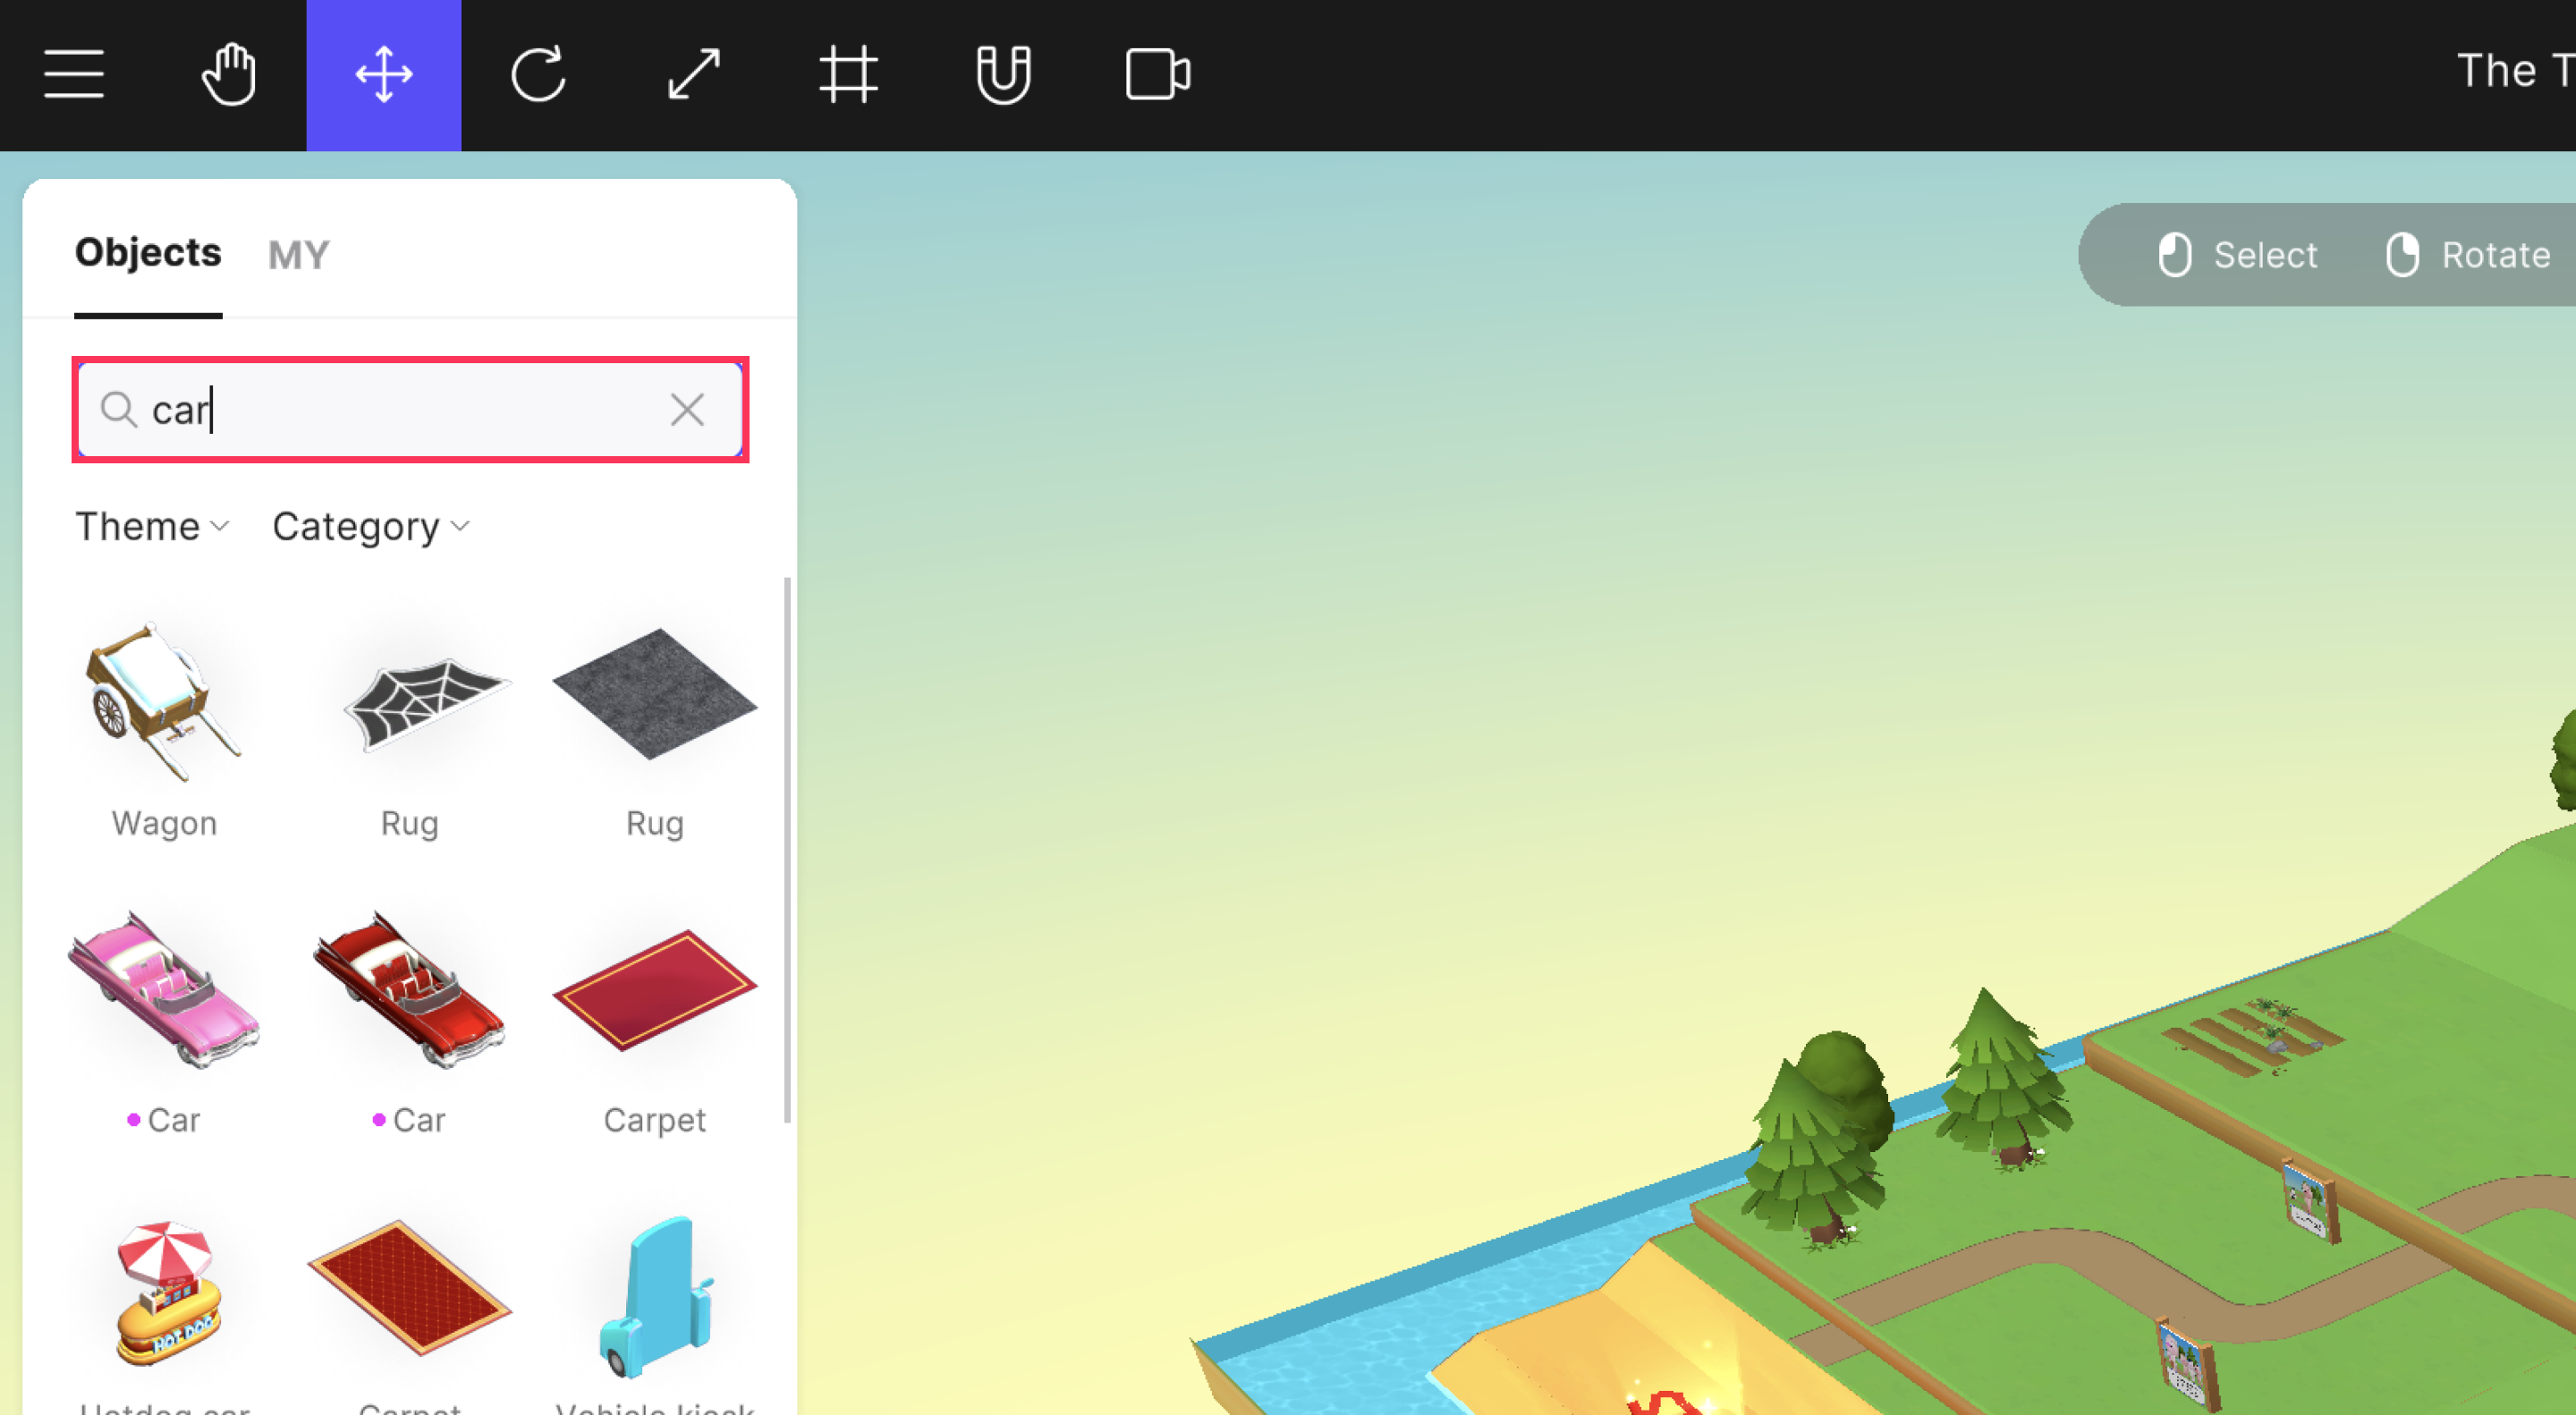 2022 UPDATED) How to Import Vehicles into Roblox Studio No Blender